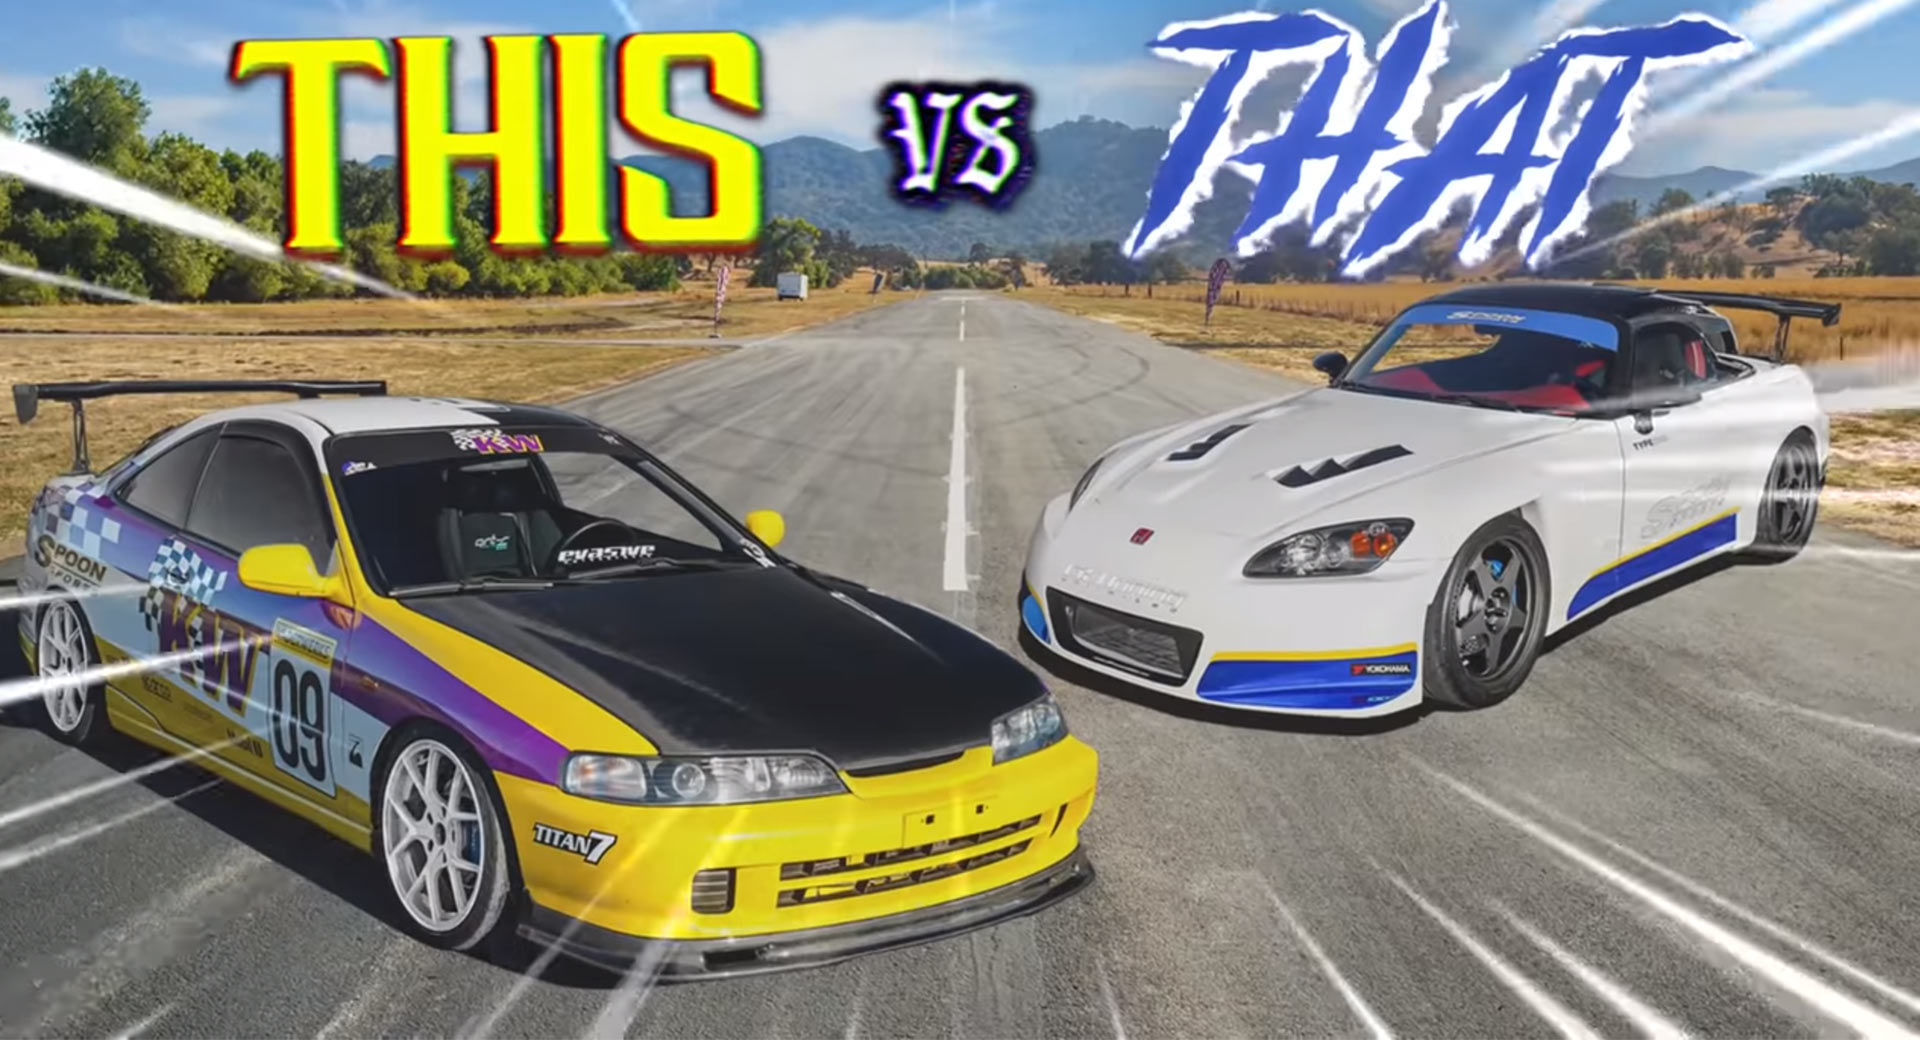 Fwd Vs Rwd As Honda S2000 And Integra Type R Go Head To Head Carscoops